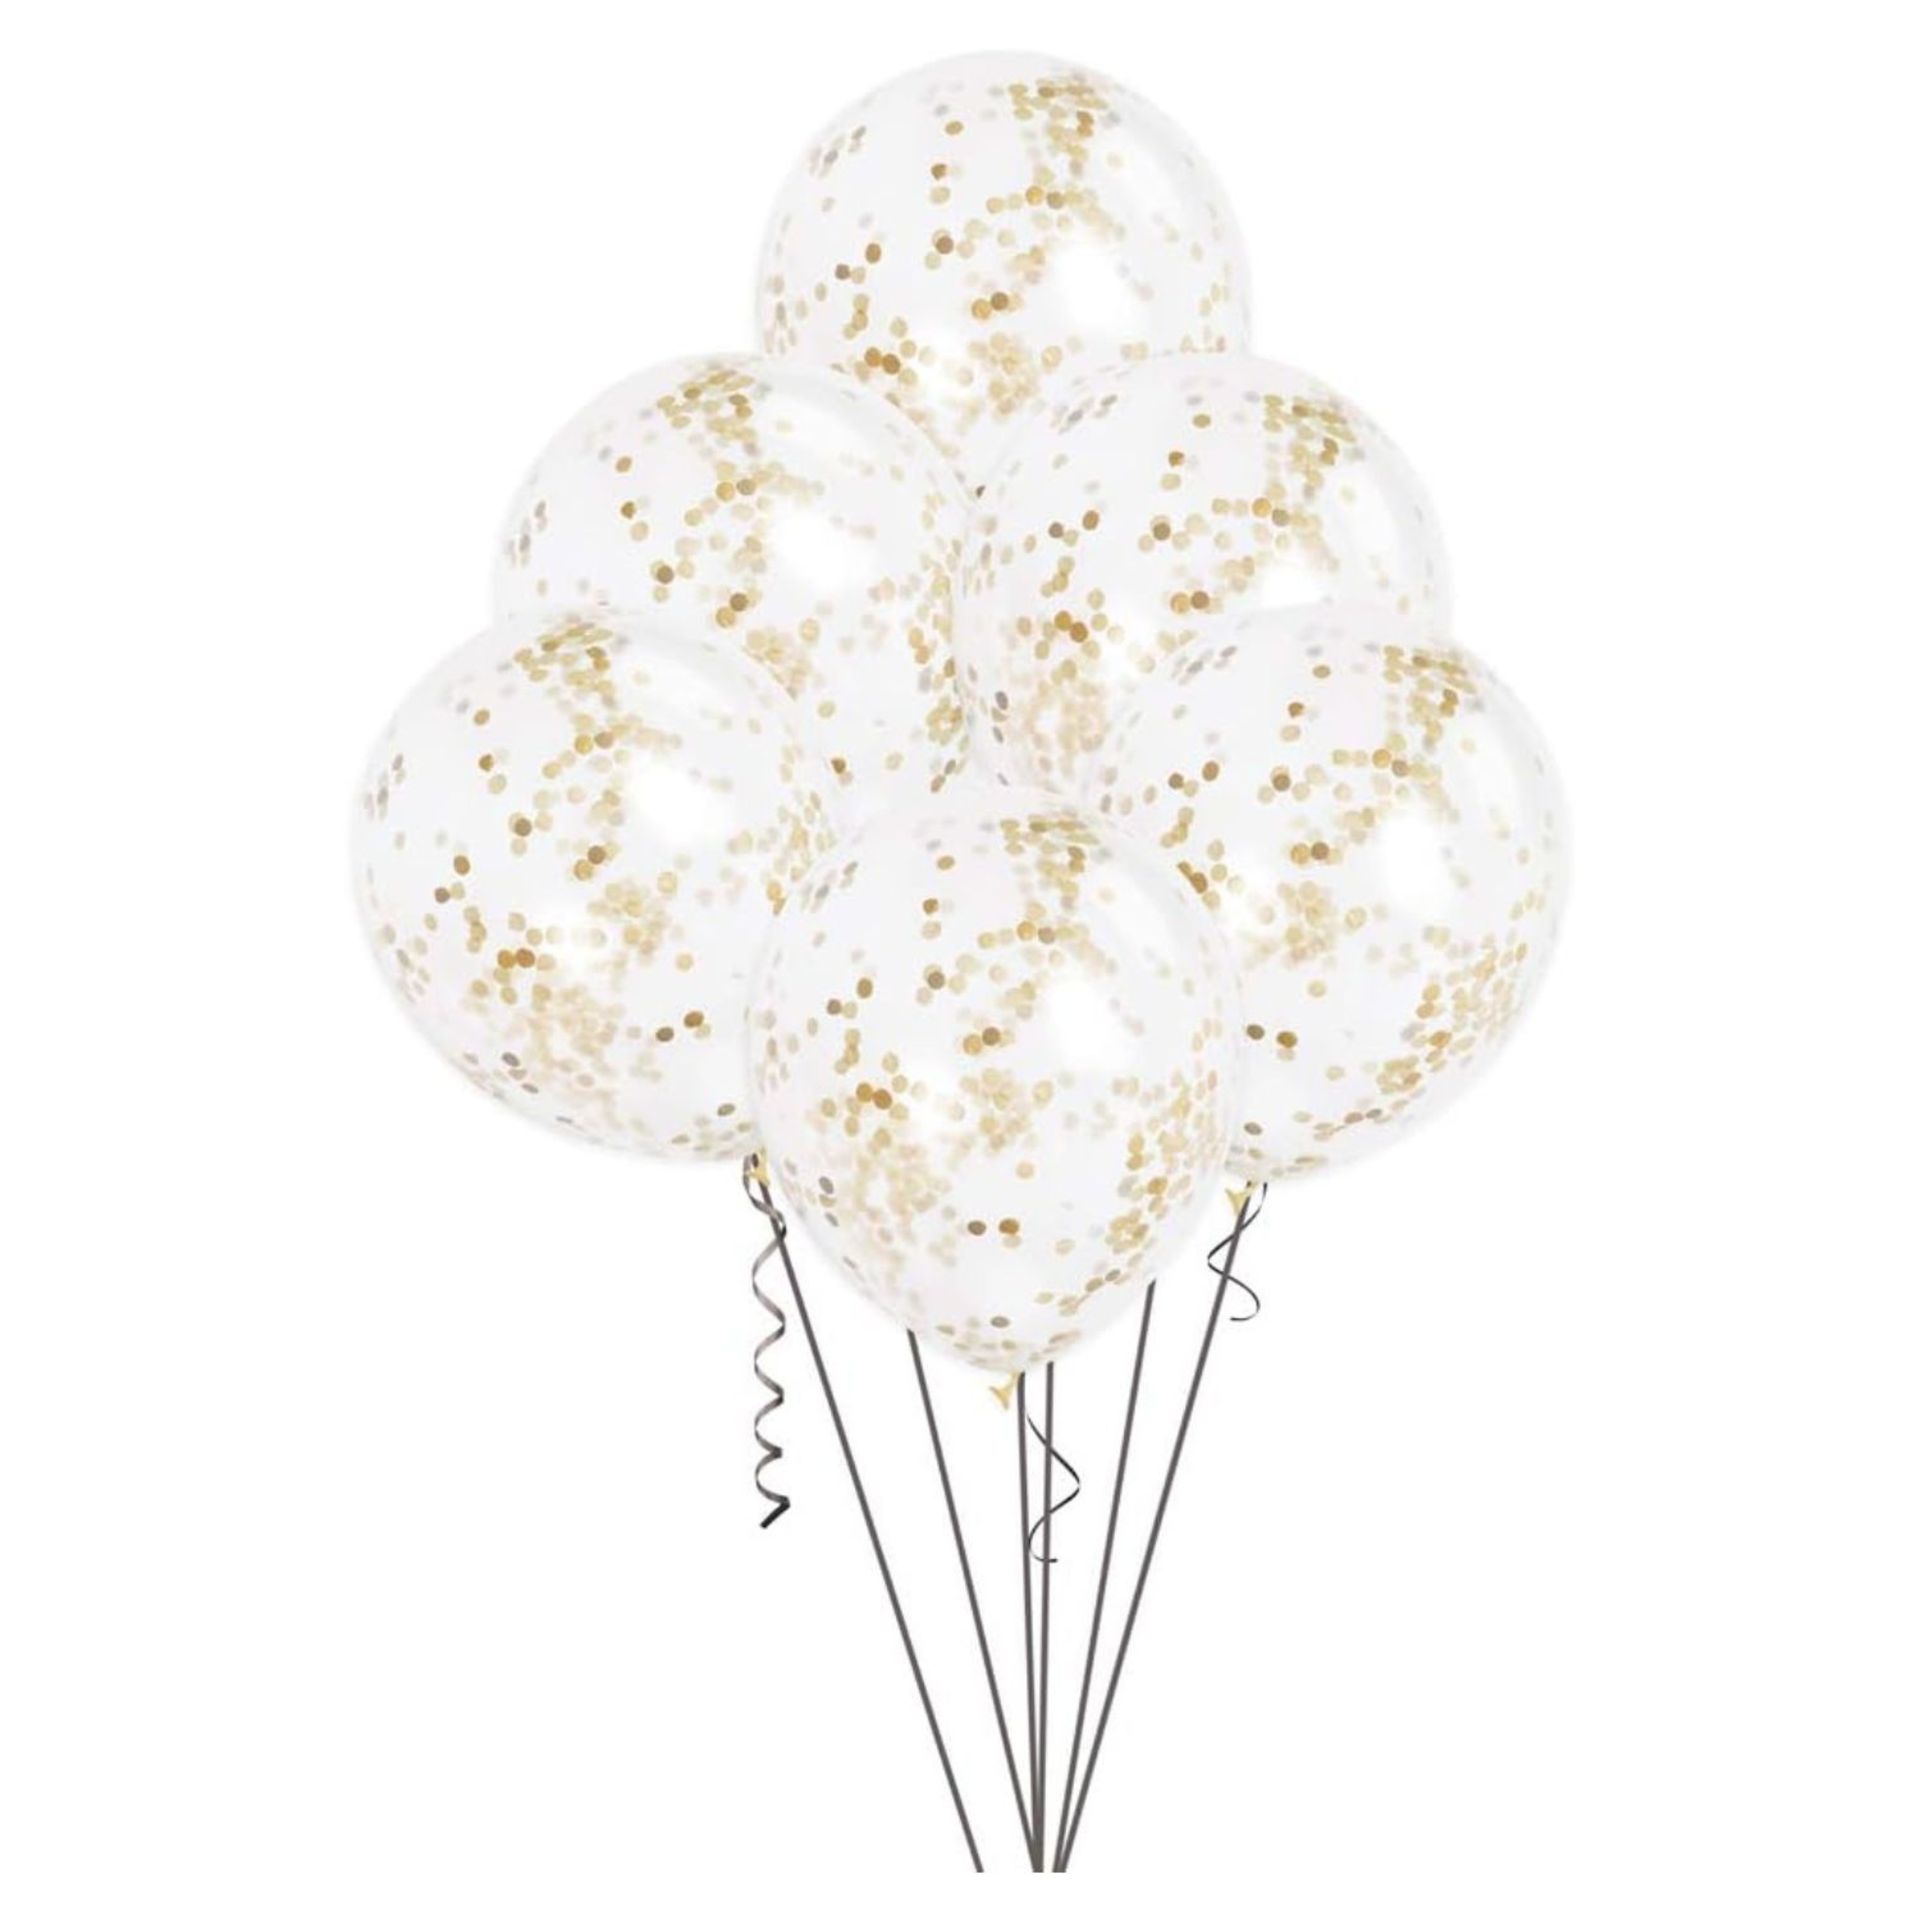 1000 PACKS OF LATEX SILVER AND GOLD CONFETTI BALLOONS, 12IN, 6CT, RRP £10,000 - Image 4 of 7